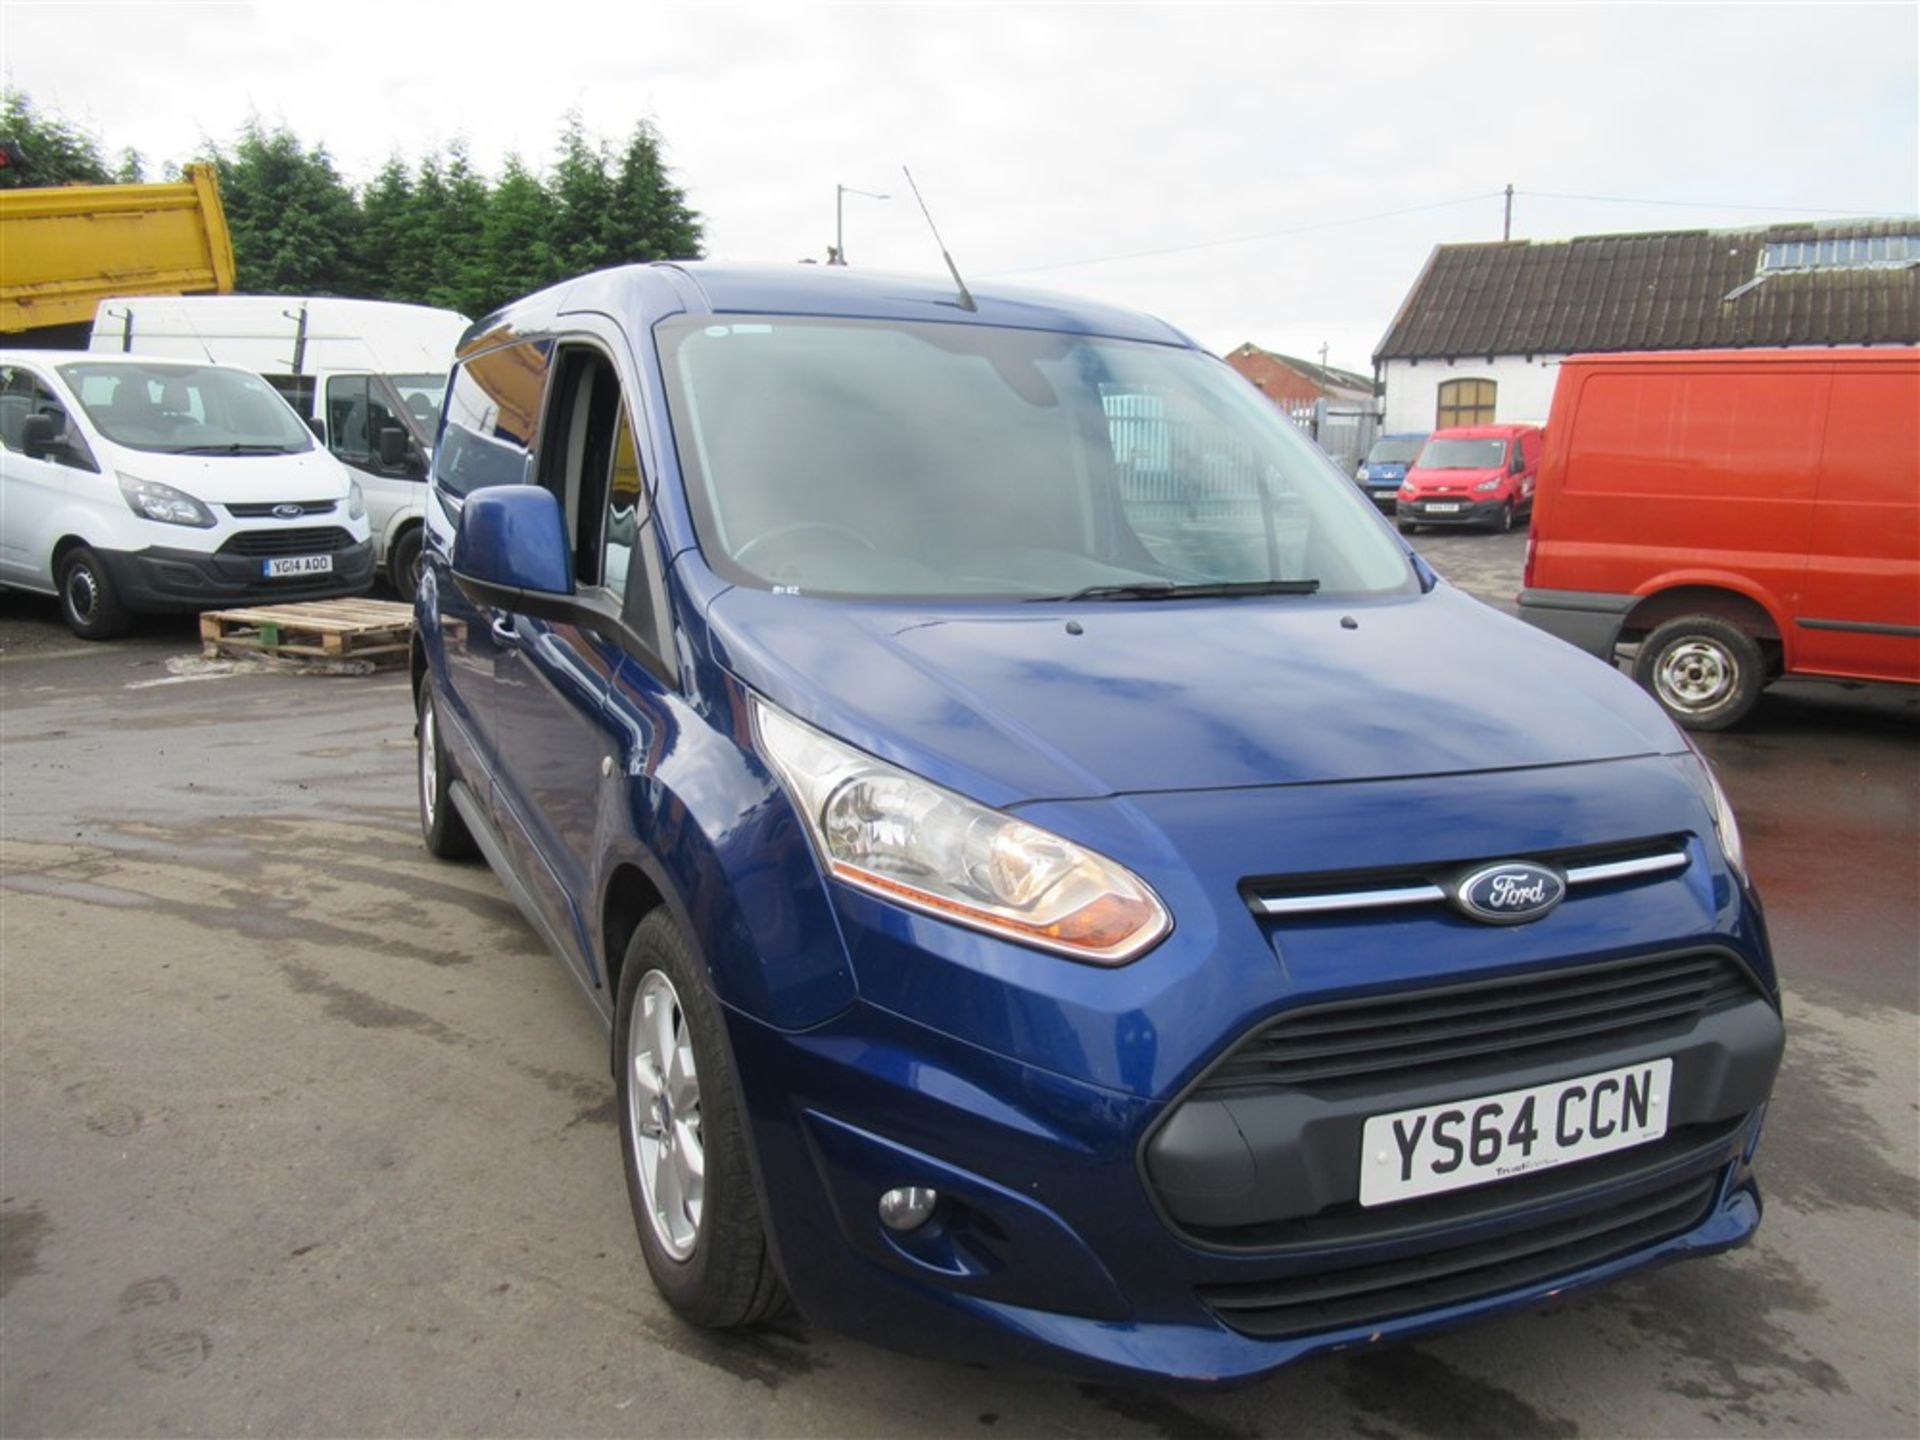 64 reg FORD TRANSIT CONNECT 240 LIMITED, 1ST REG 12/14, 128144M WARRANTED, V5 HERE, 1 OWNER FROM NEW